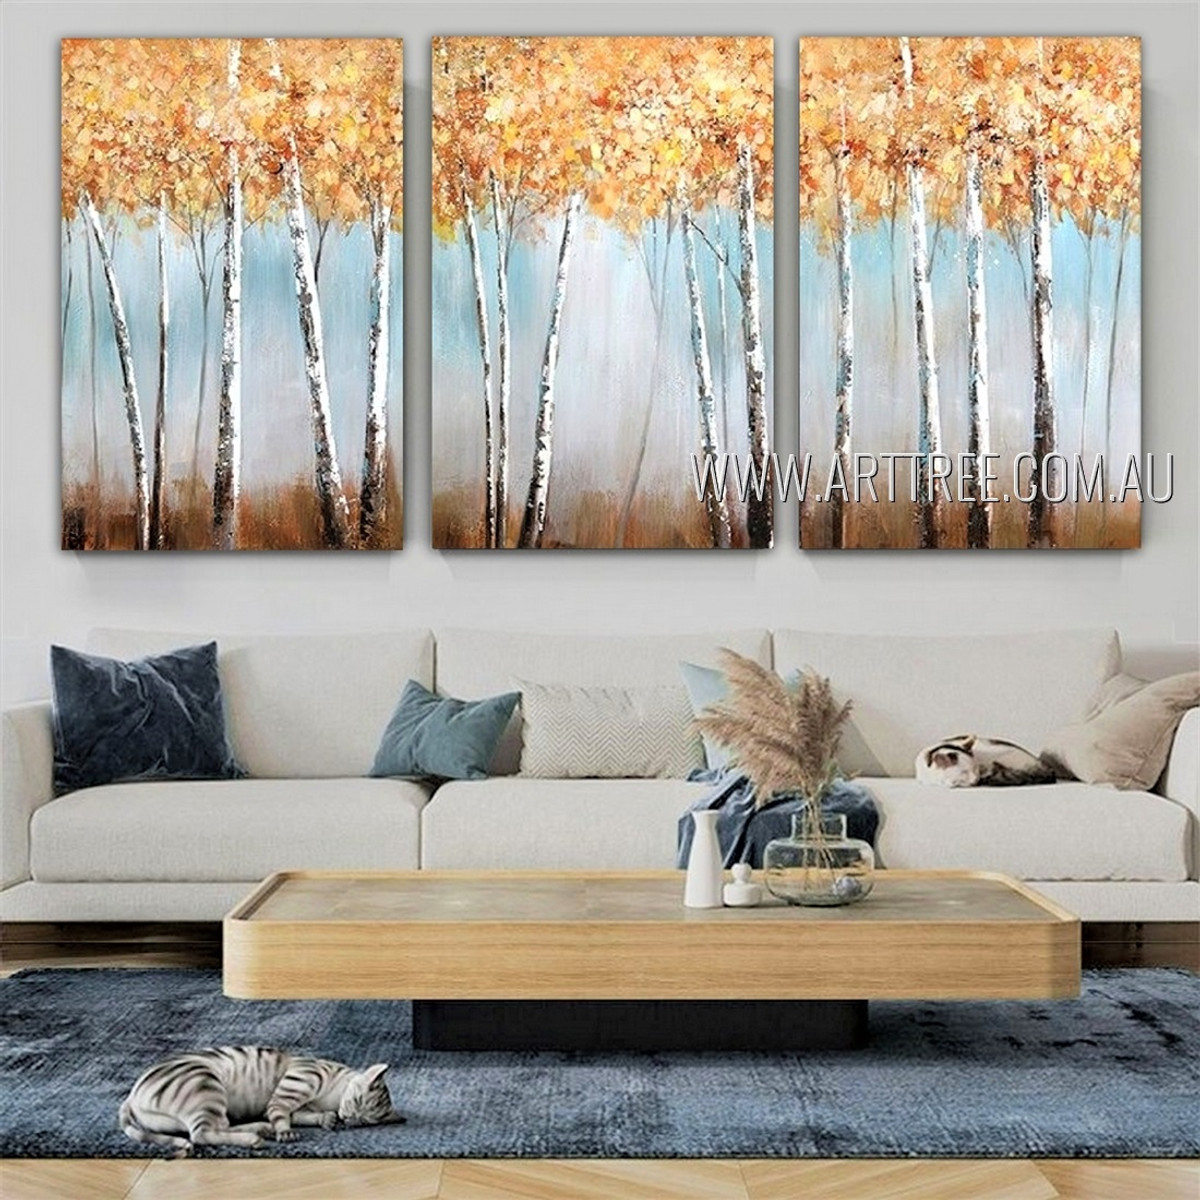 Drouth Trees Landscape Nature Modern Heavy Texture Artist Handmade Framed Stretched 3 Piece Multi Panel Canvas Painting Wall Art Set For Room Outfit